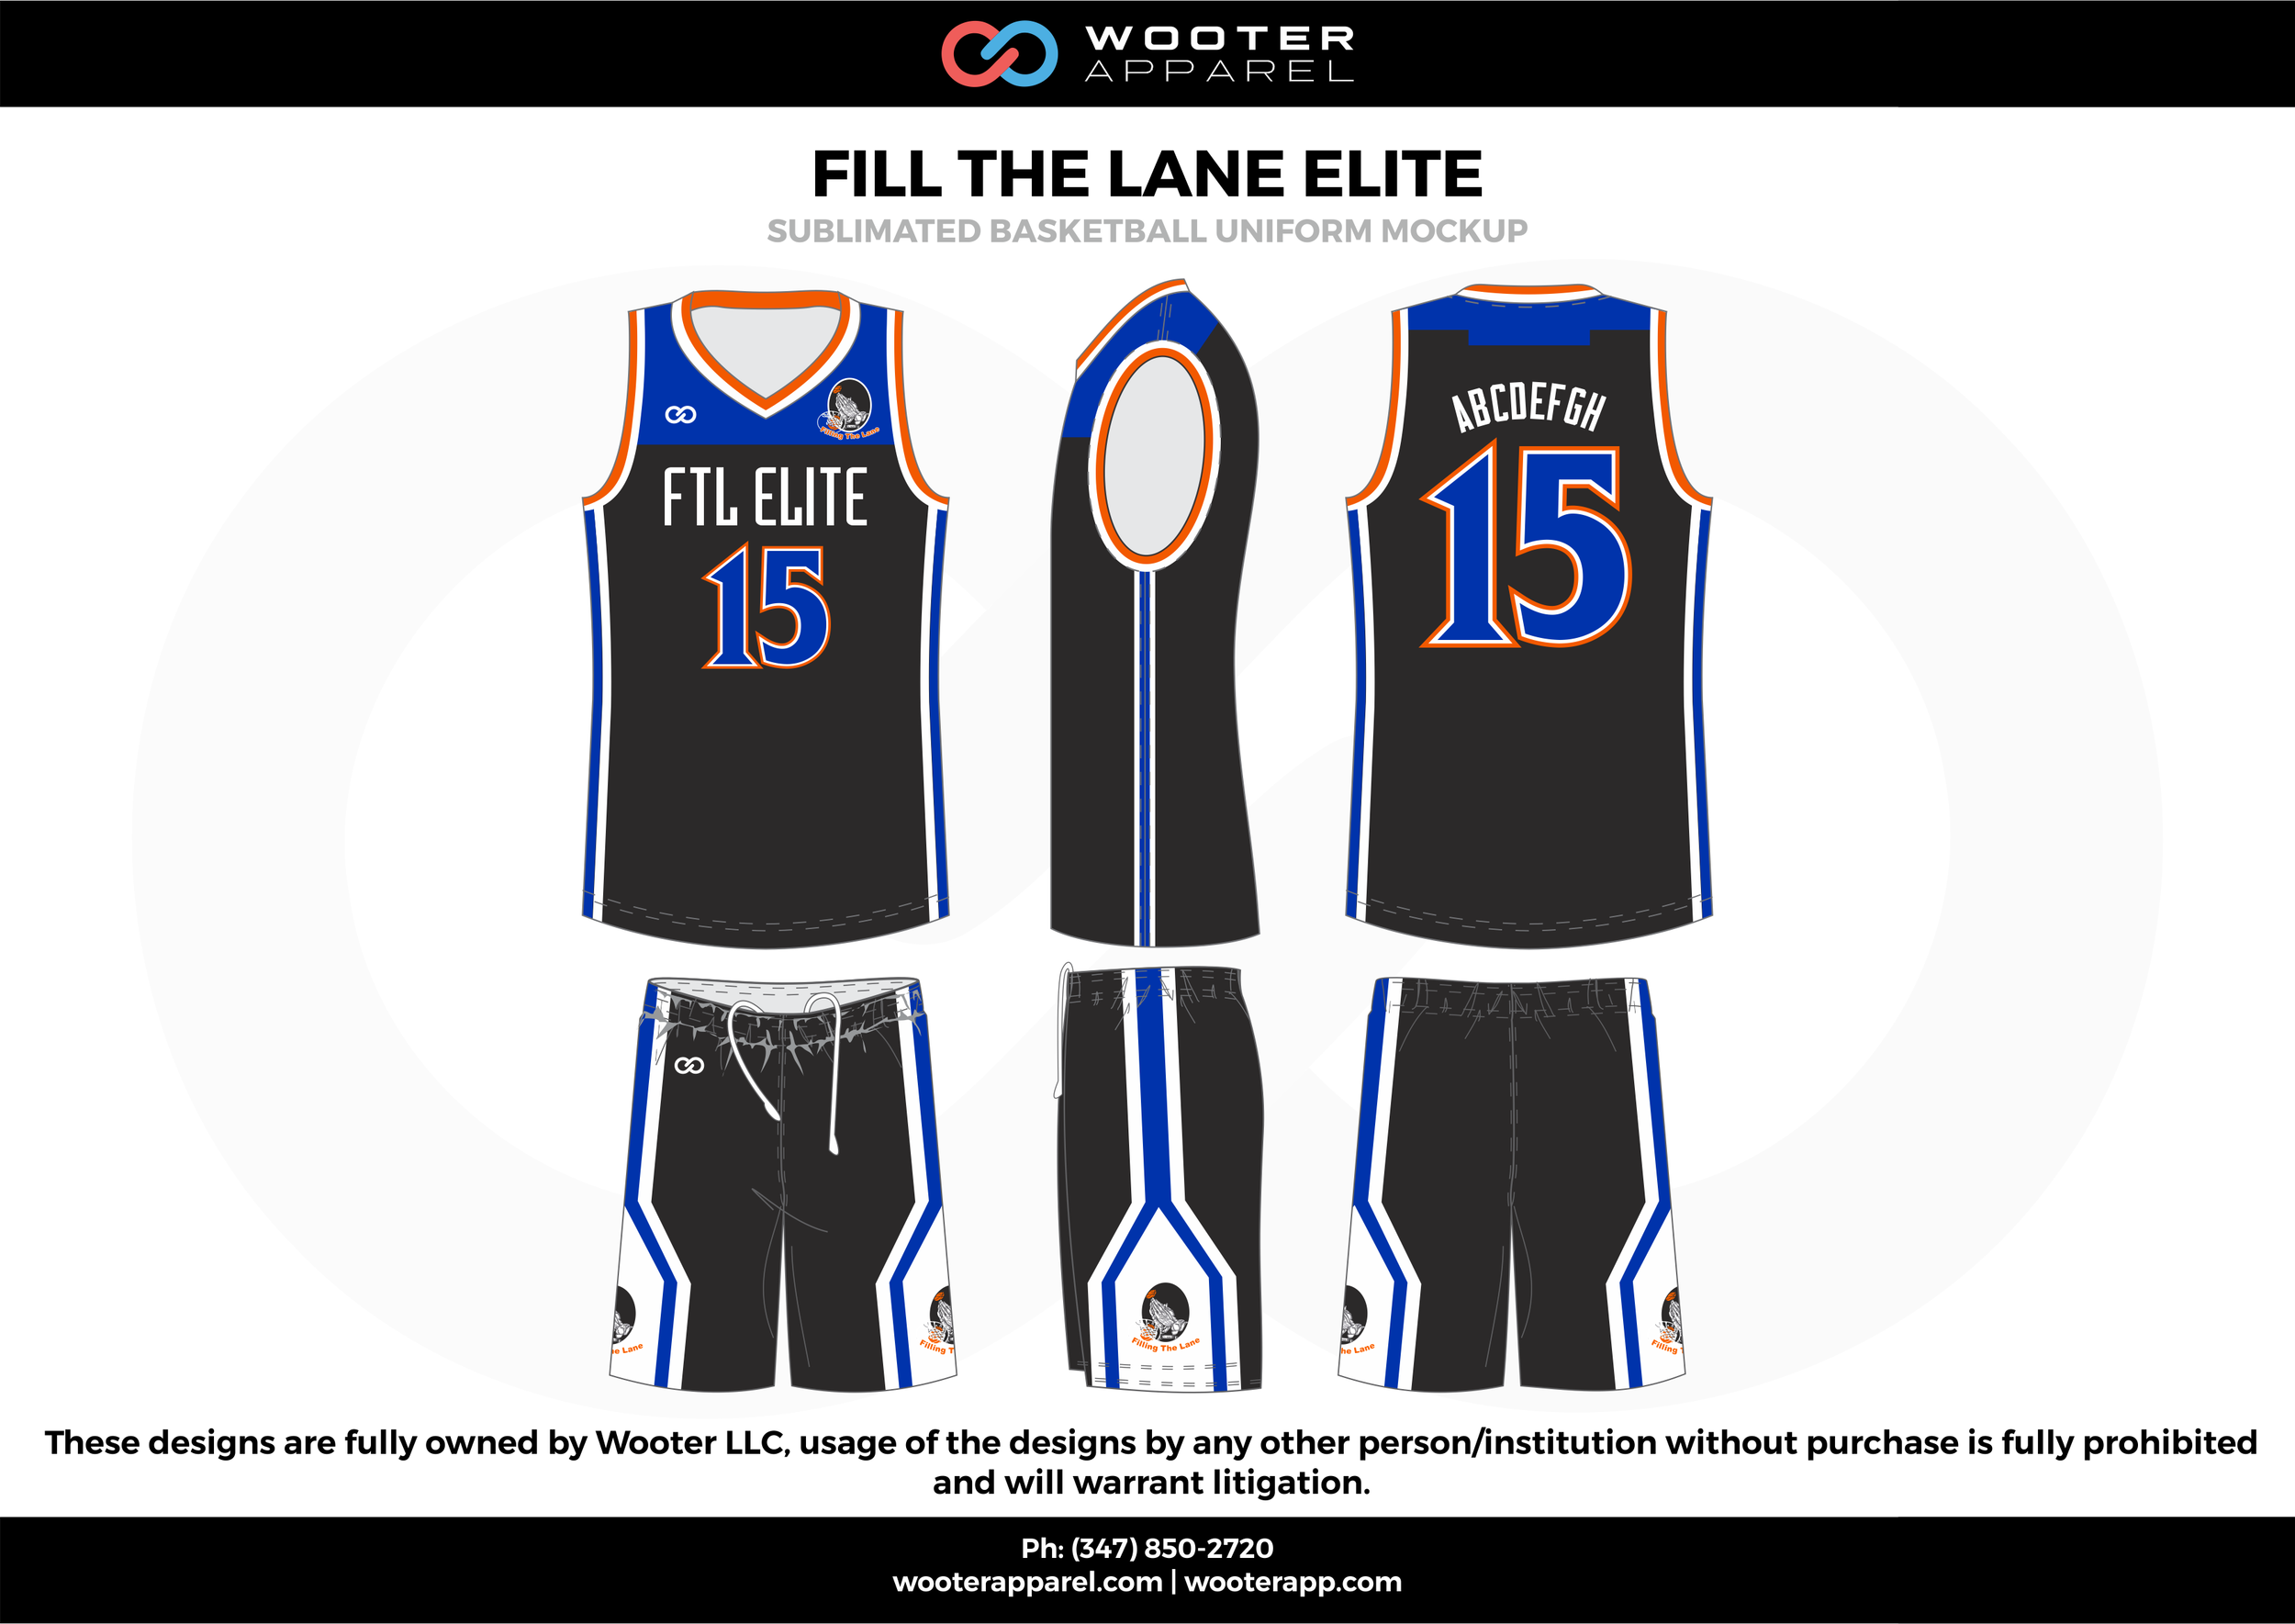 blue and black basketball jersey